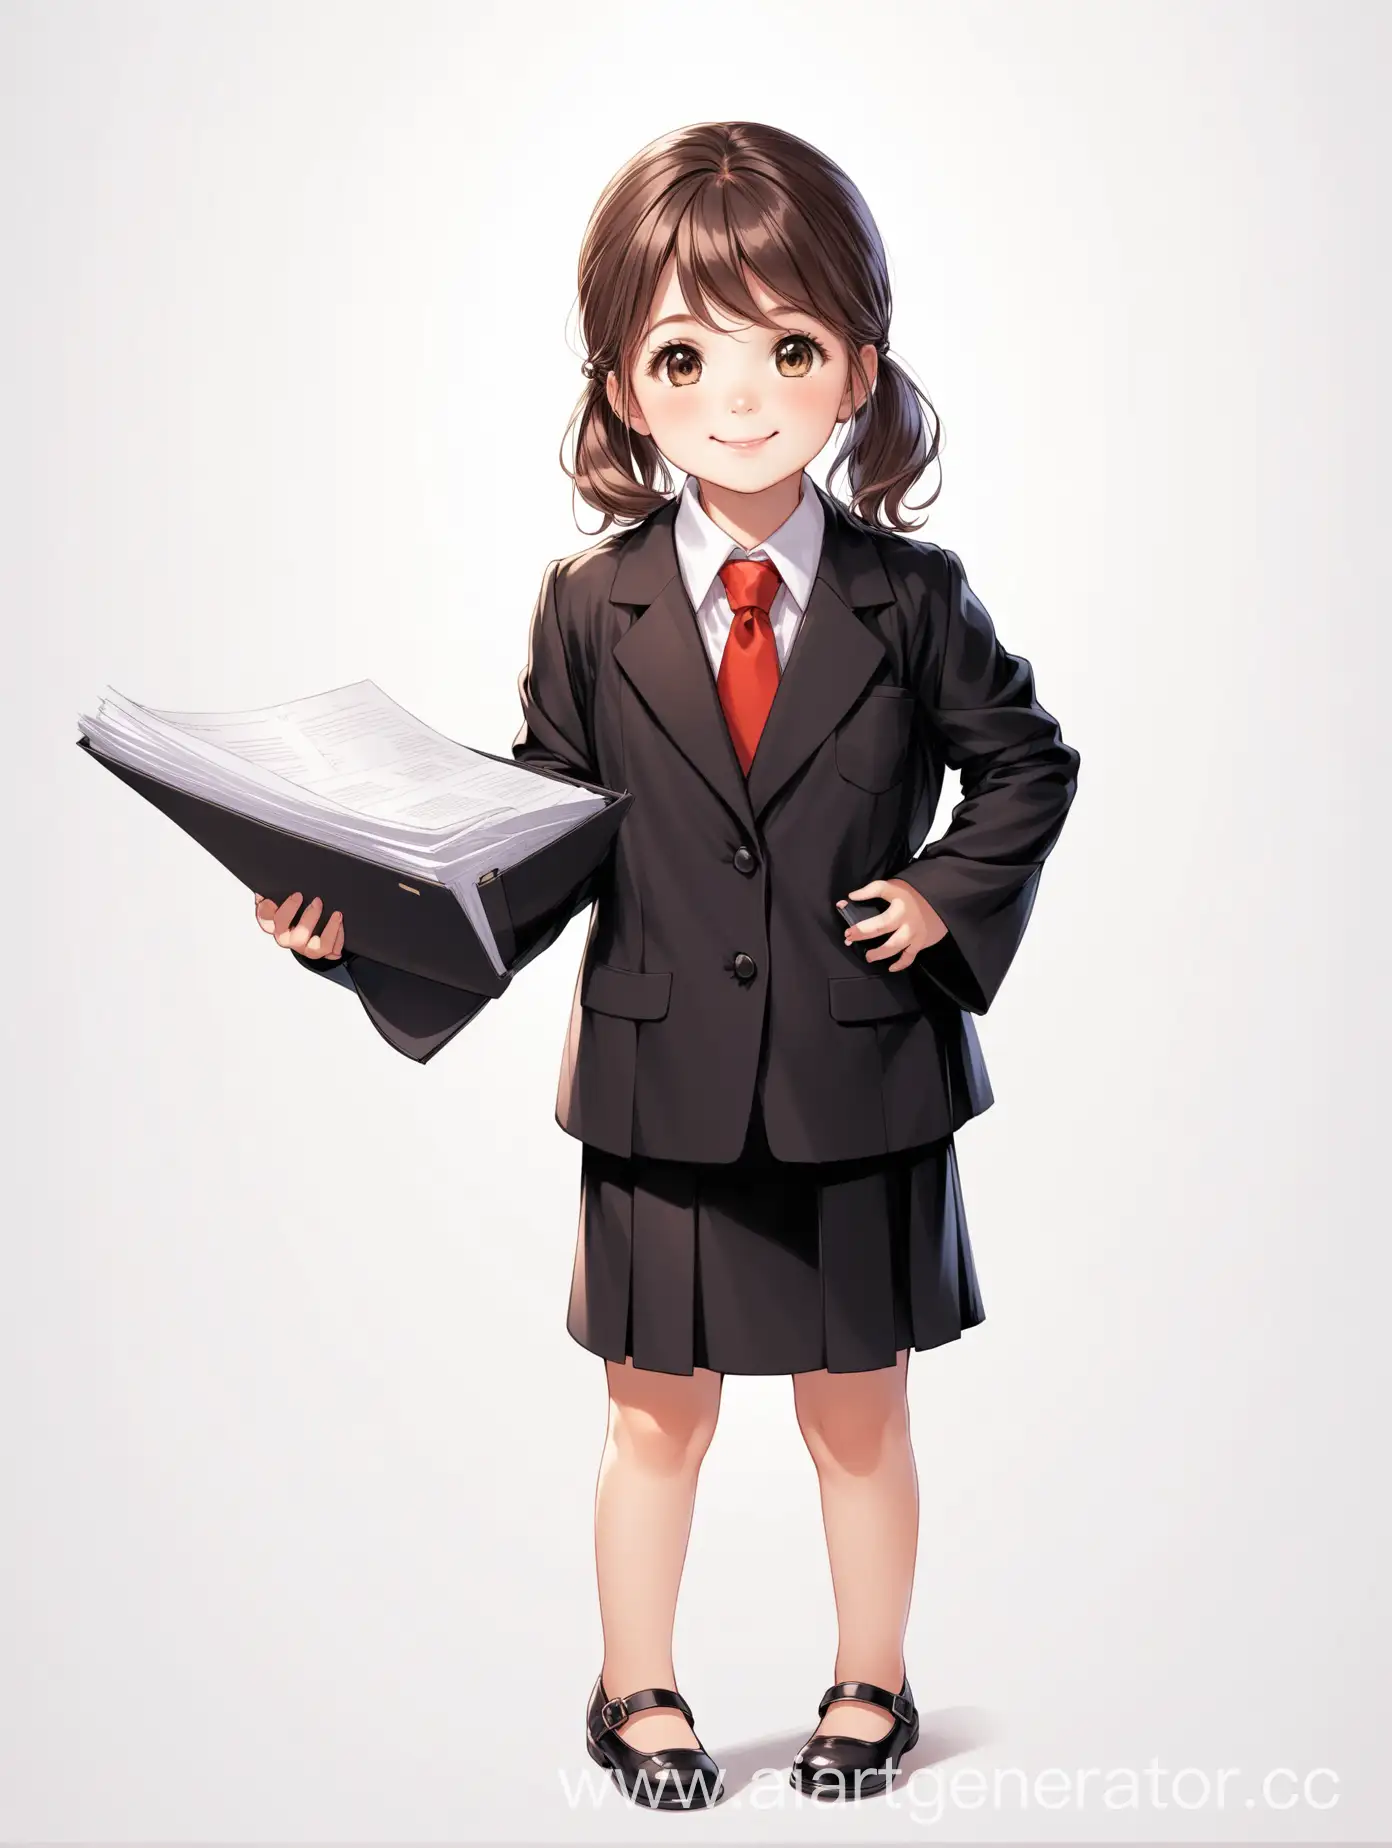 Smiling-Little-Girl-Dressed-as-Lawyer-with-Documents-in-Hand